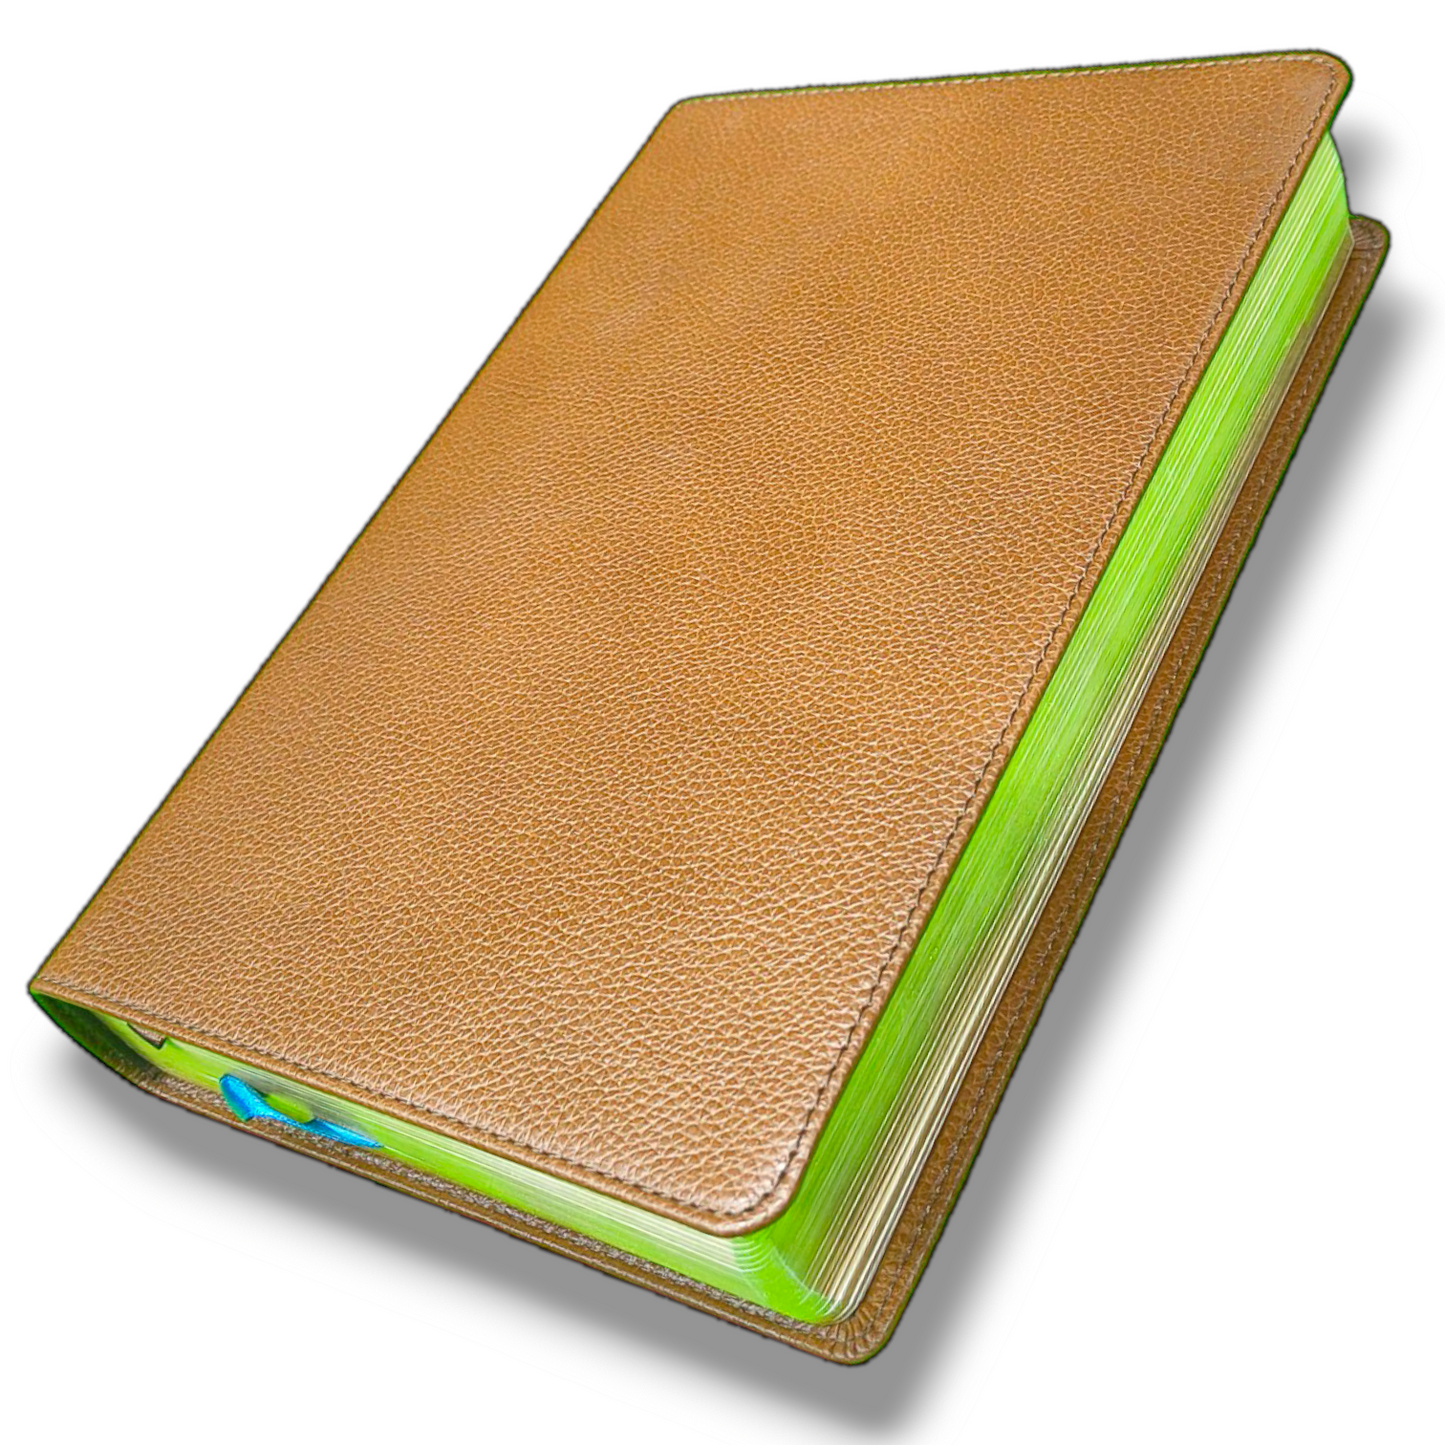 Maxwell Leadership Study Bible | New Edition | Brown Leather Imitation Cover